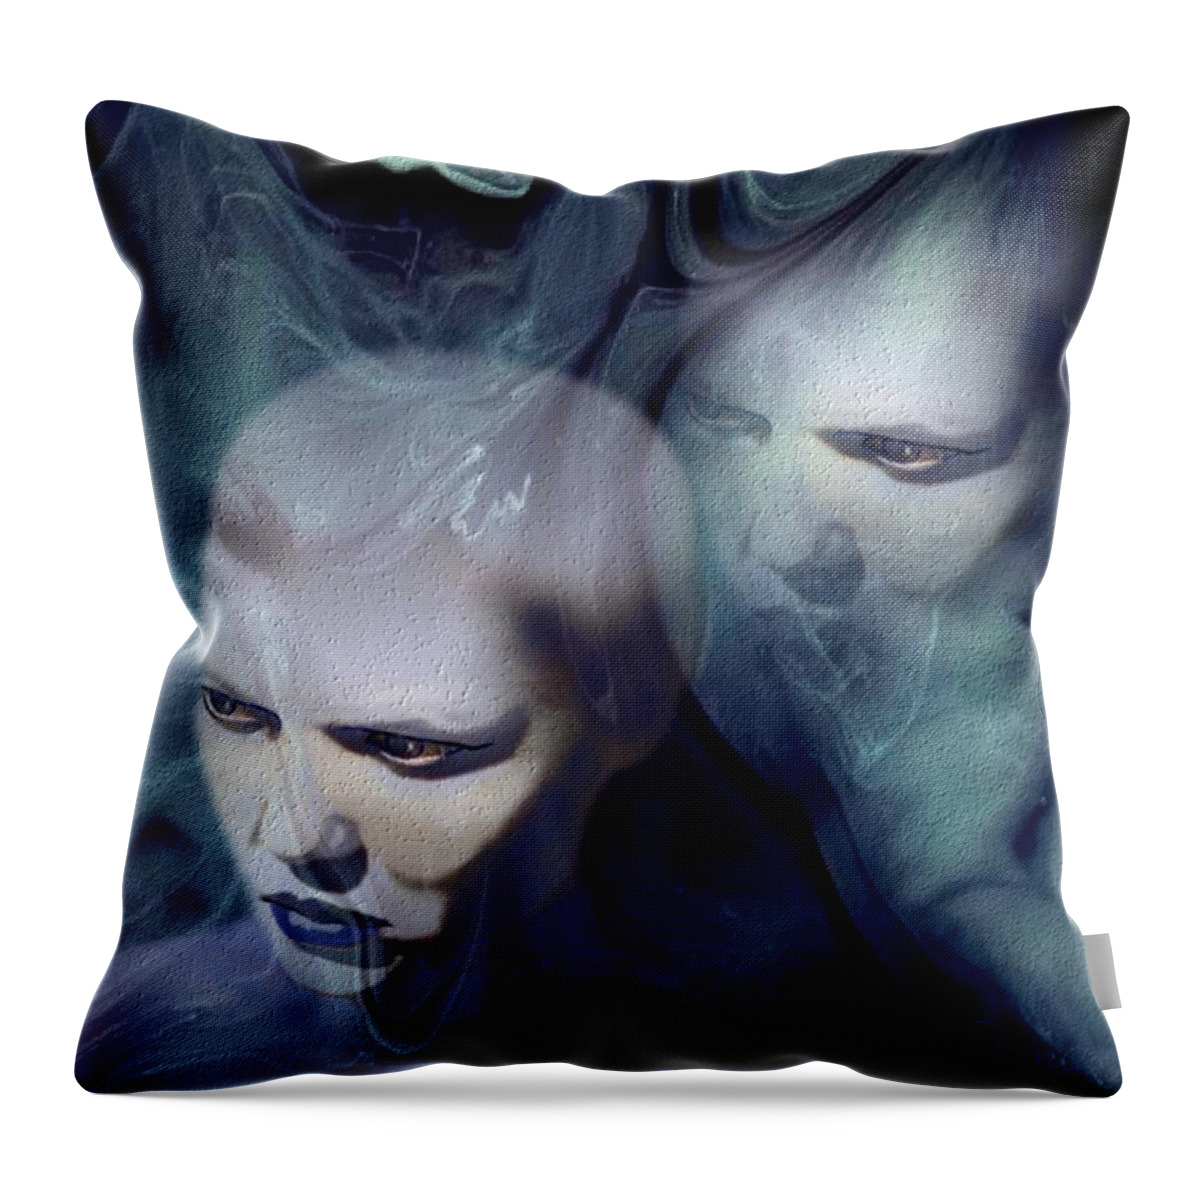 Dream Afterlife Experience Blue Smoke Throw Pillow featuring the digital art Untitled by Veronica Jackson